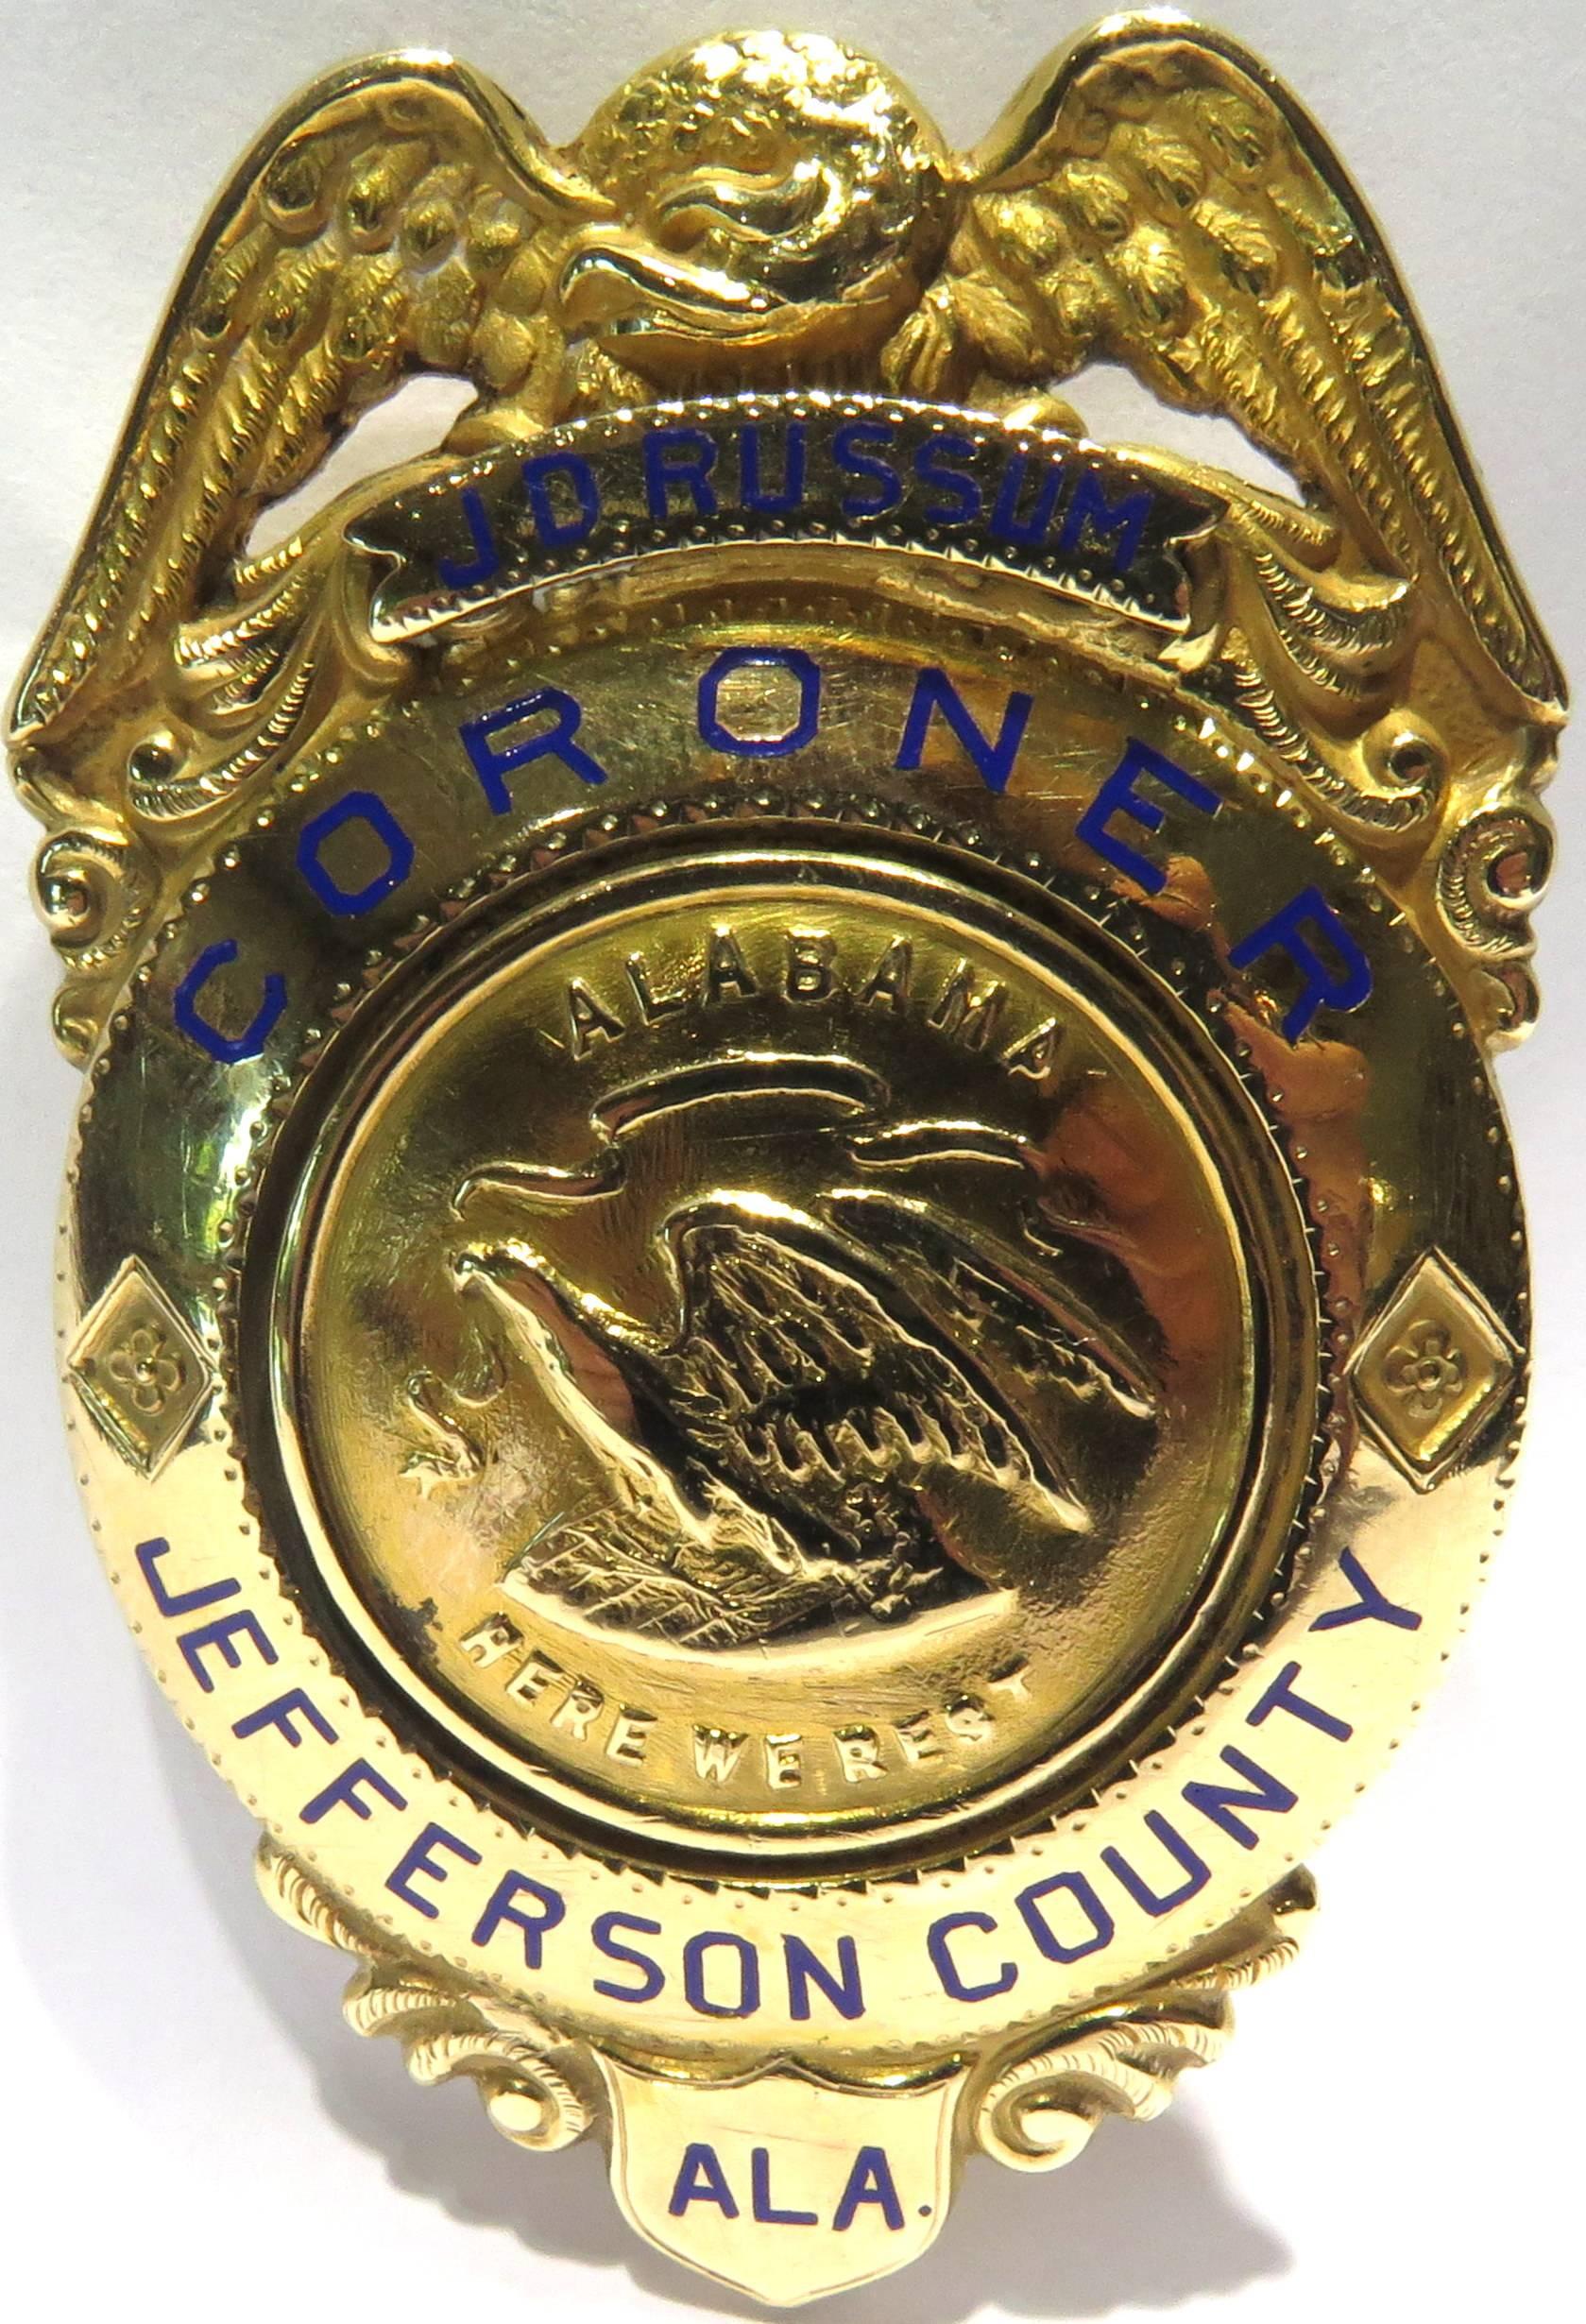 This unique 14k gold Coroner badge has a lot of history. The coroner this badge was presented to, was one of the players involved in the 1921 